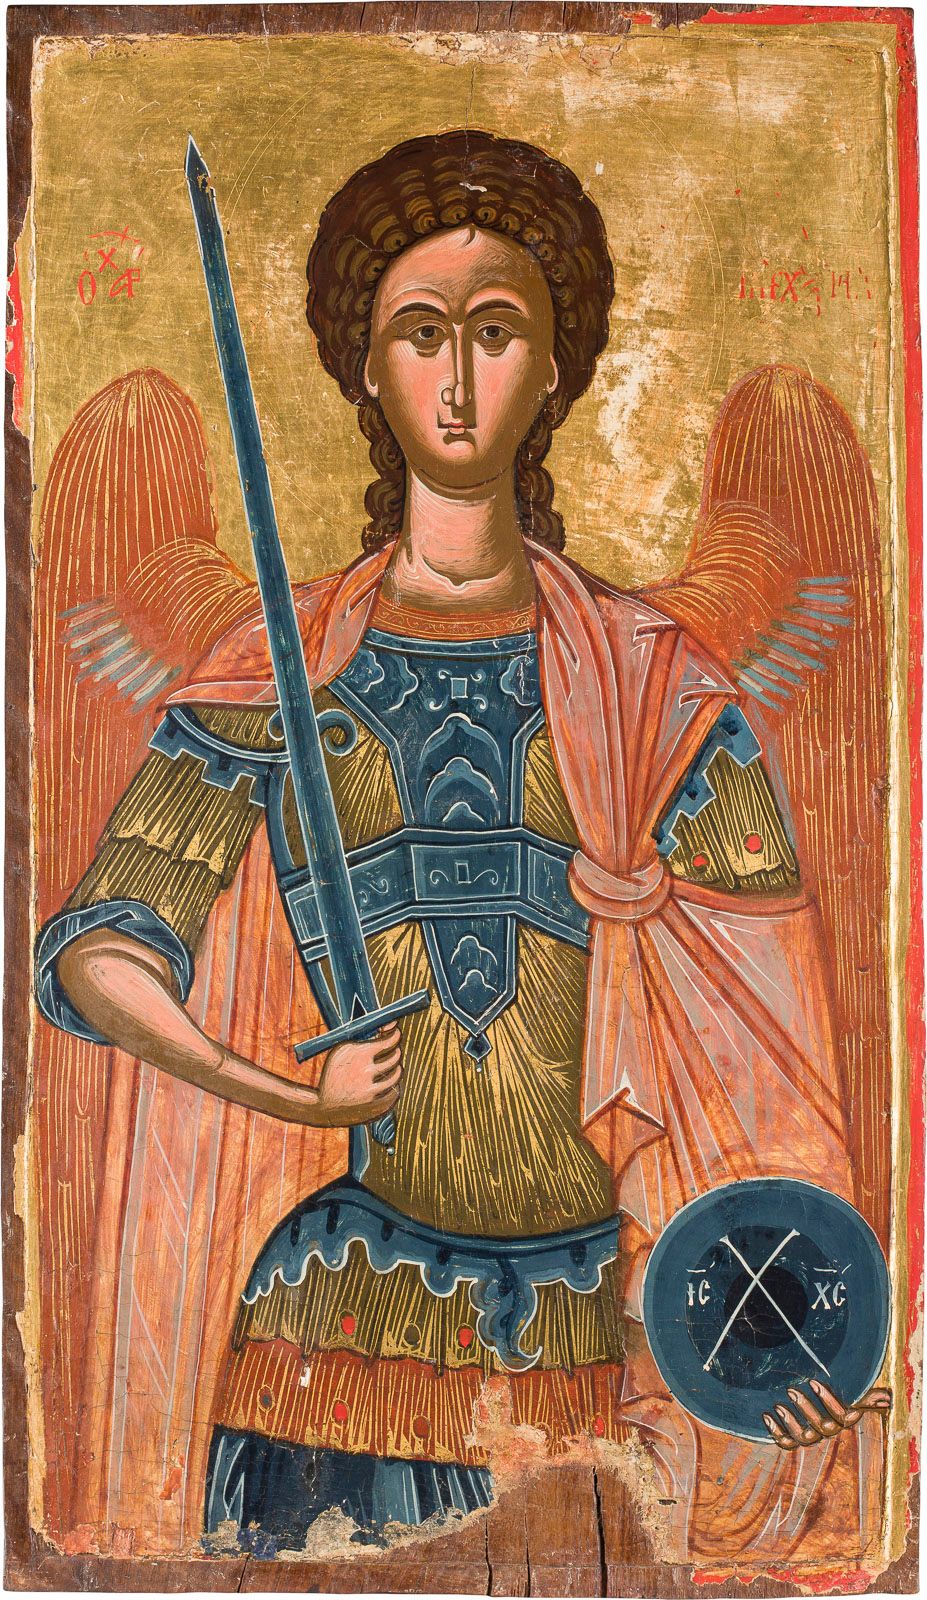 A MONUMENTAL ICON SHOWING THE ARCHANGEL MICHAEL A MONUMENTAL ICON SHOWING THE AR&hellip;